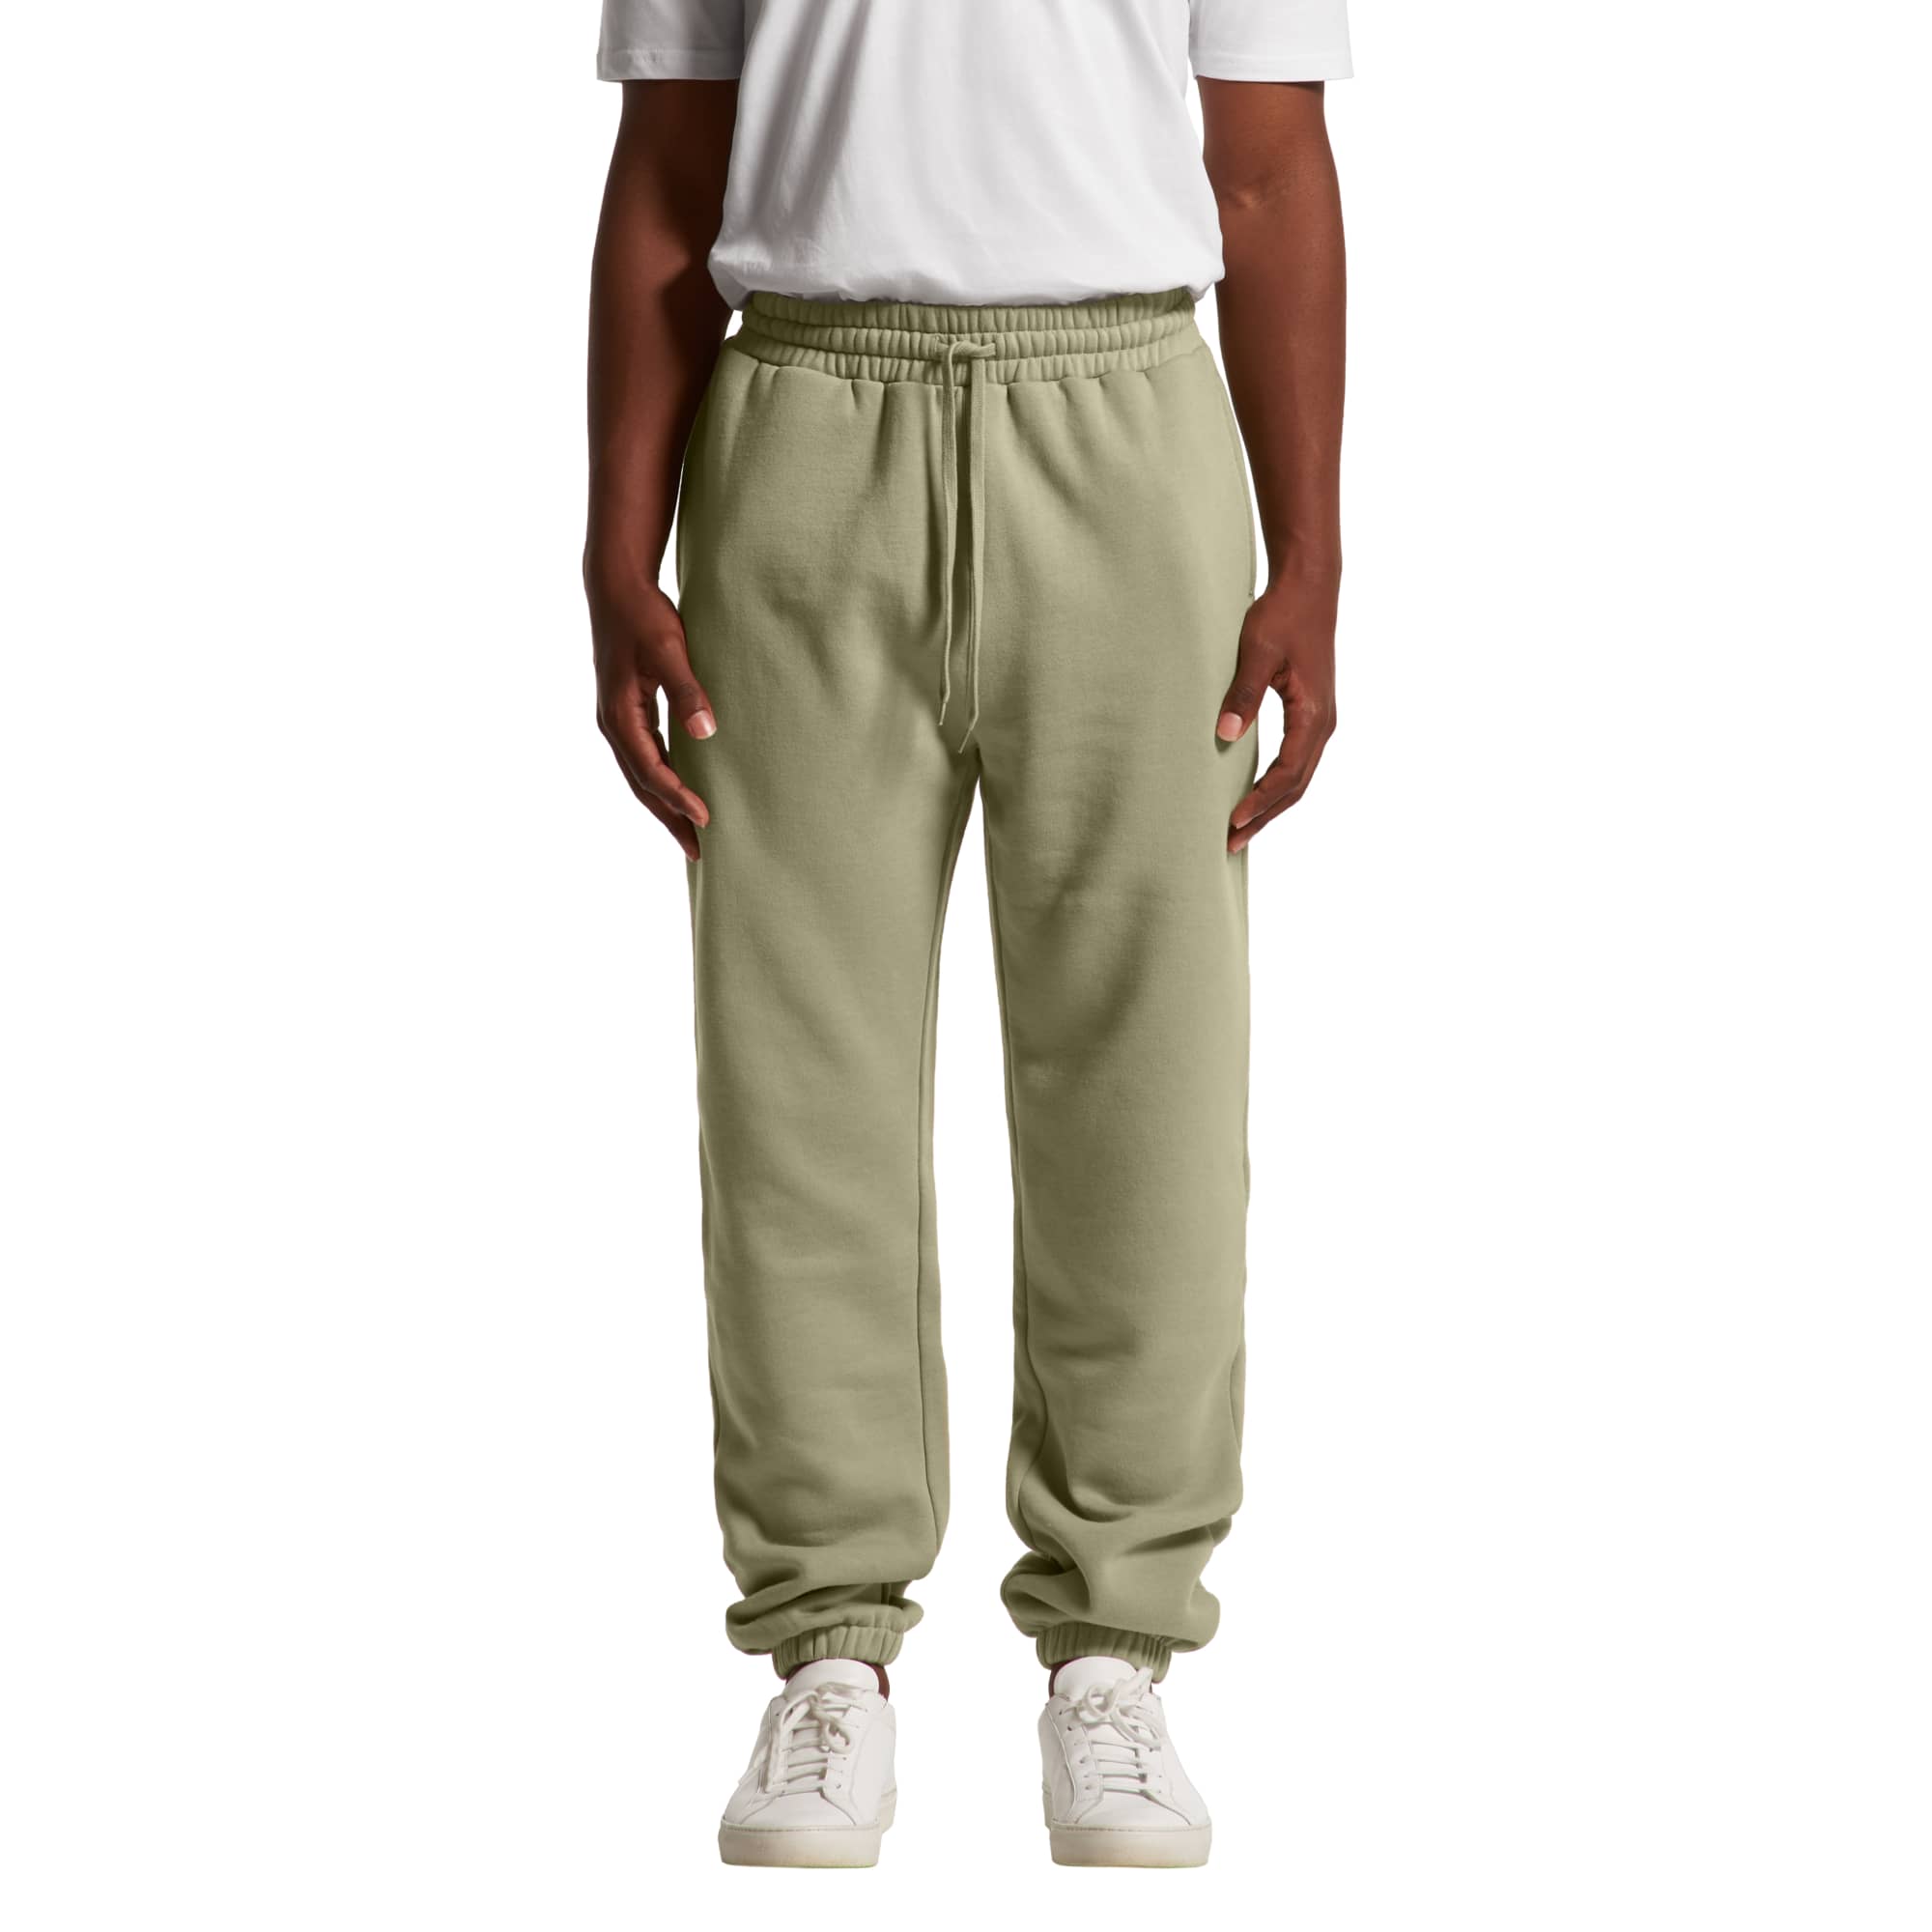 5921_stencil_track_pants_front.jpg